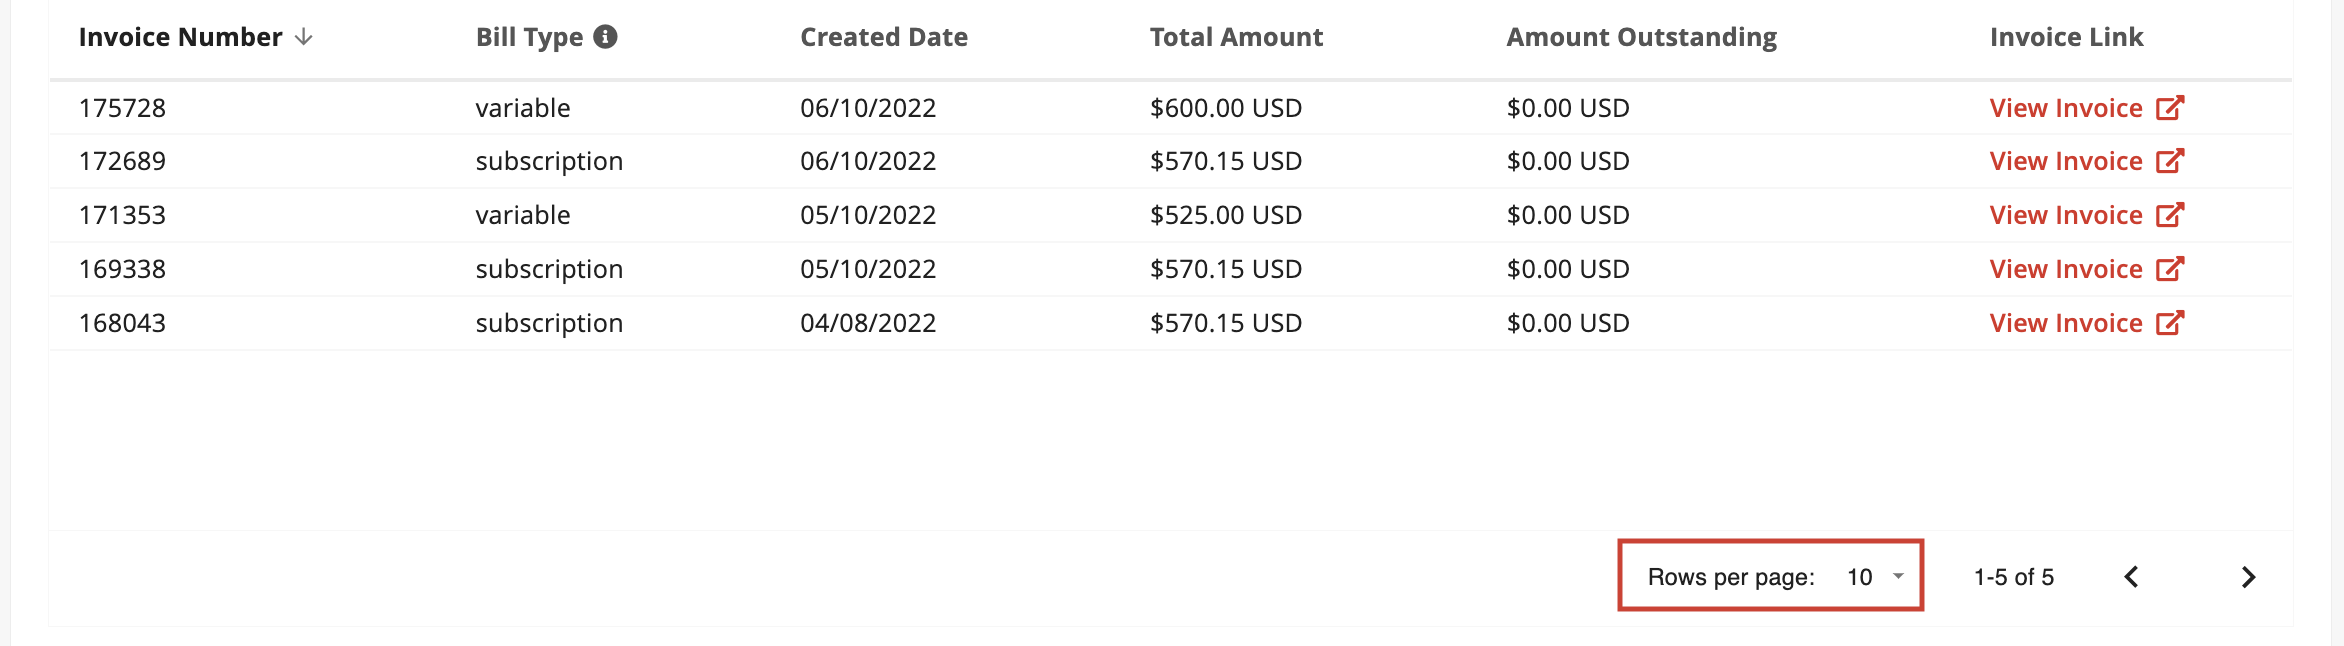 Invoices-Table_Rows.png